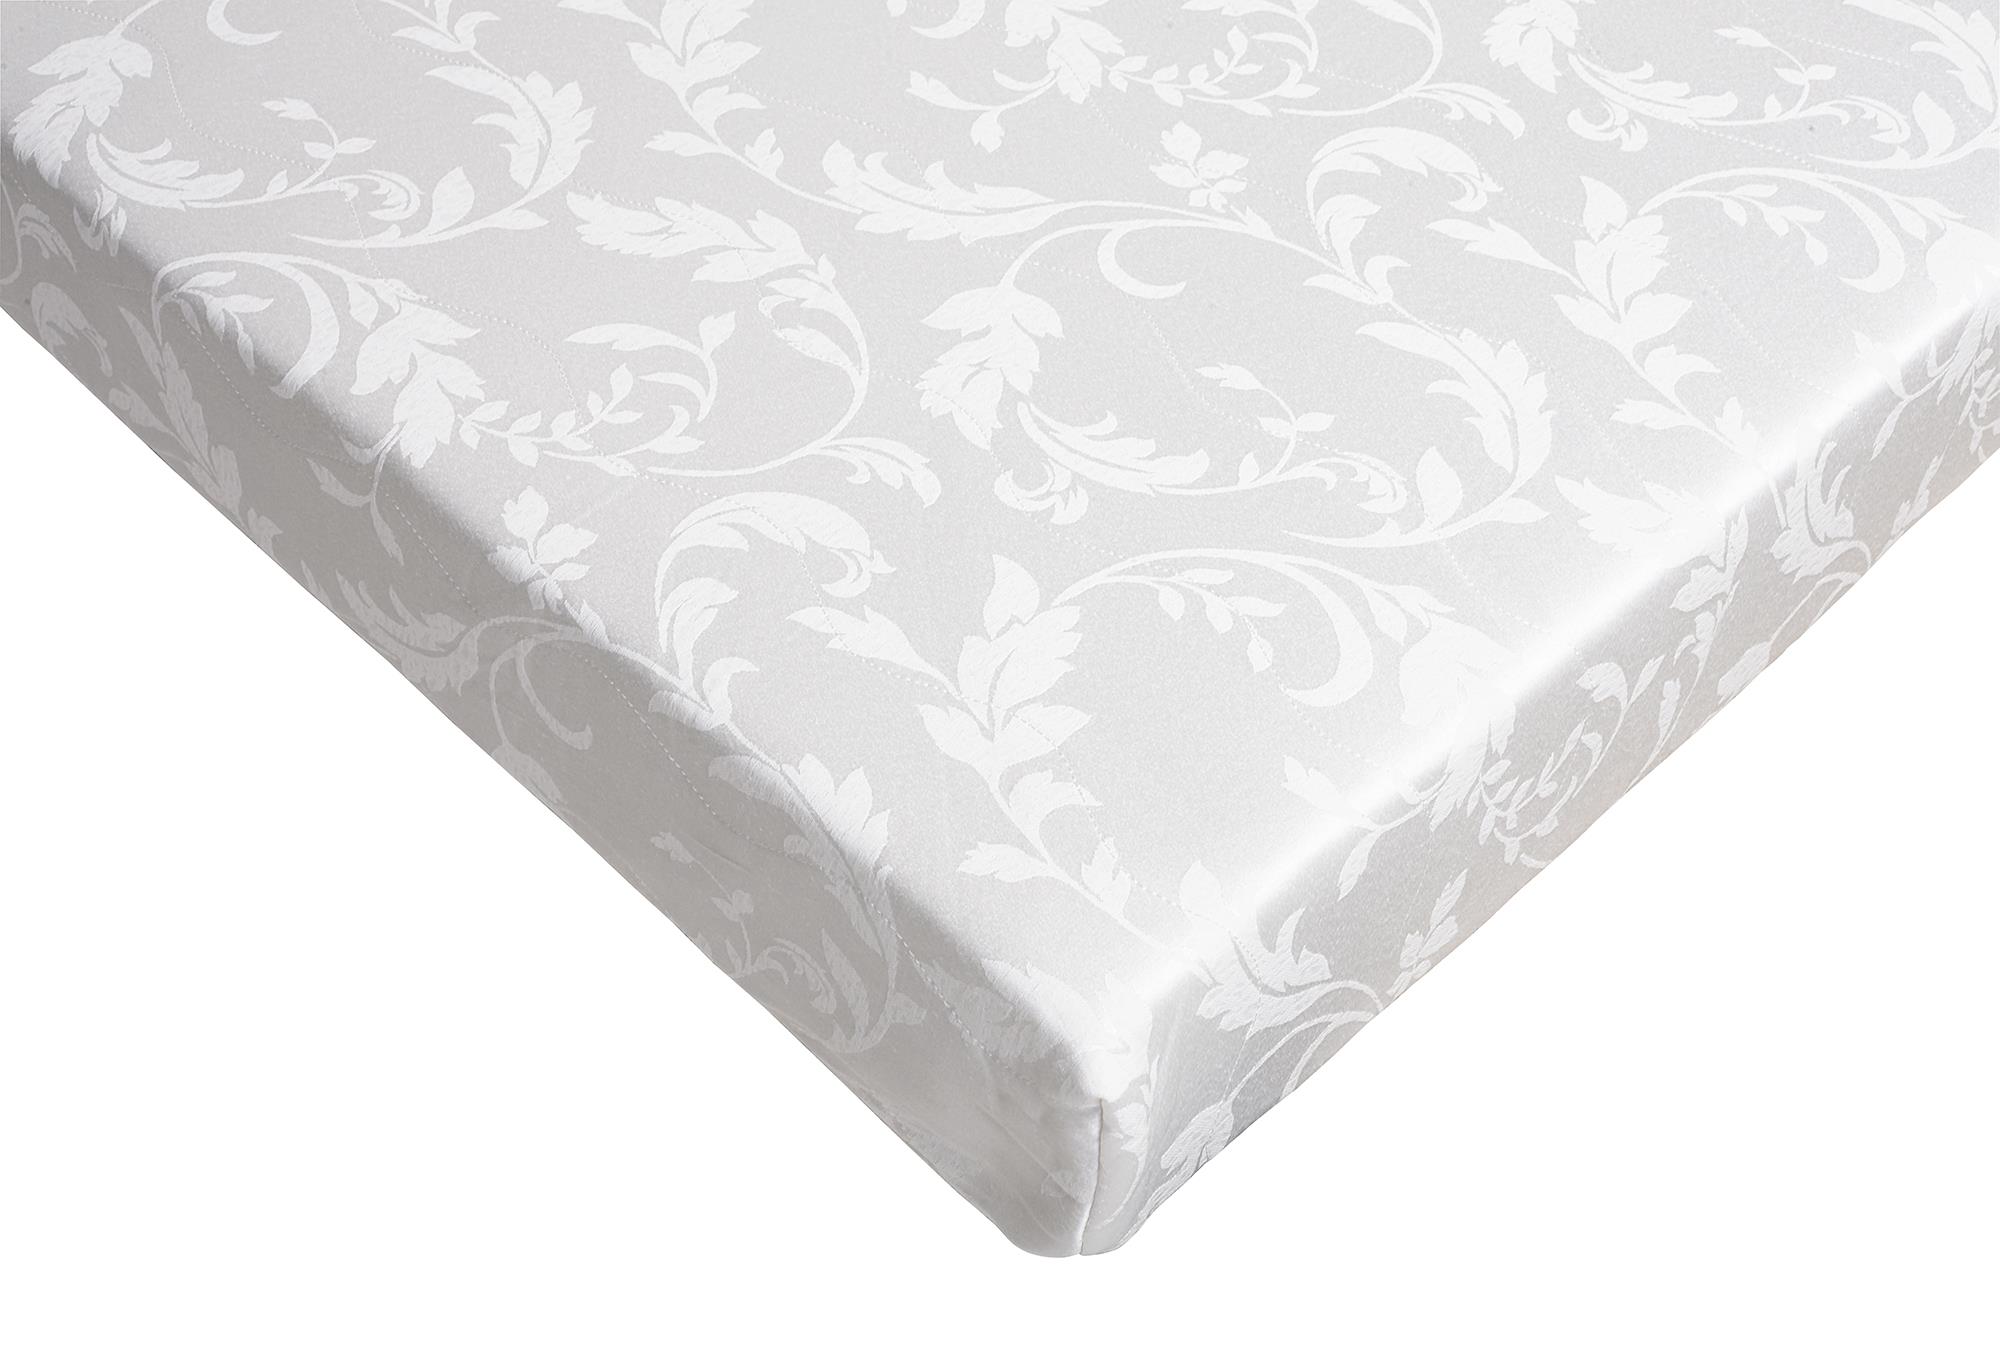 DHP Value 6 Inch Polyester Filled Bunk Bed Mattress with Jacquard Cover, Twin, White - image 5 of 9